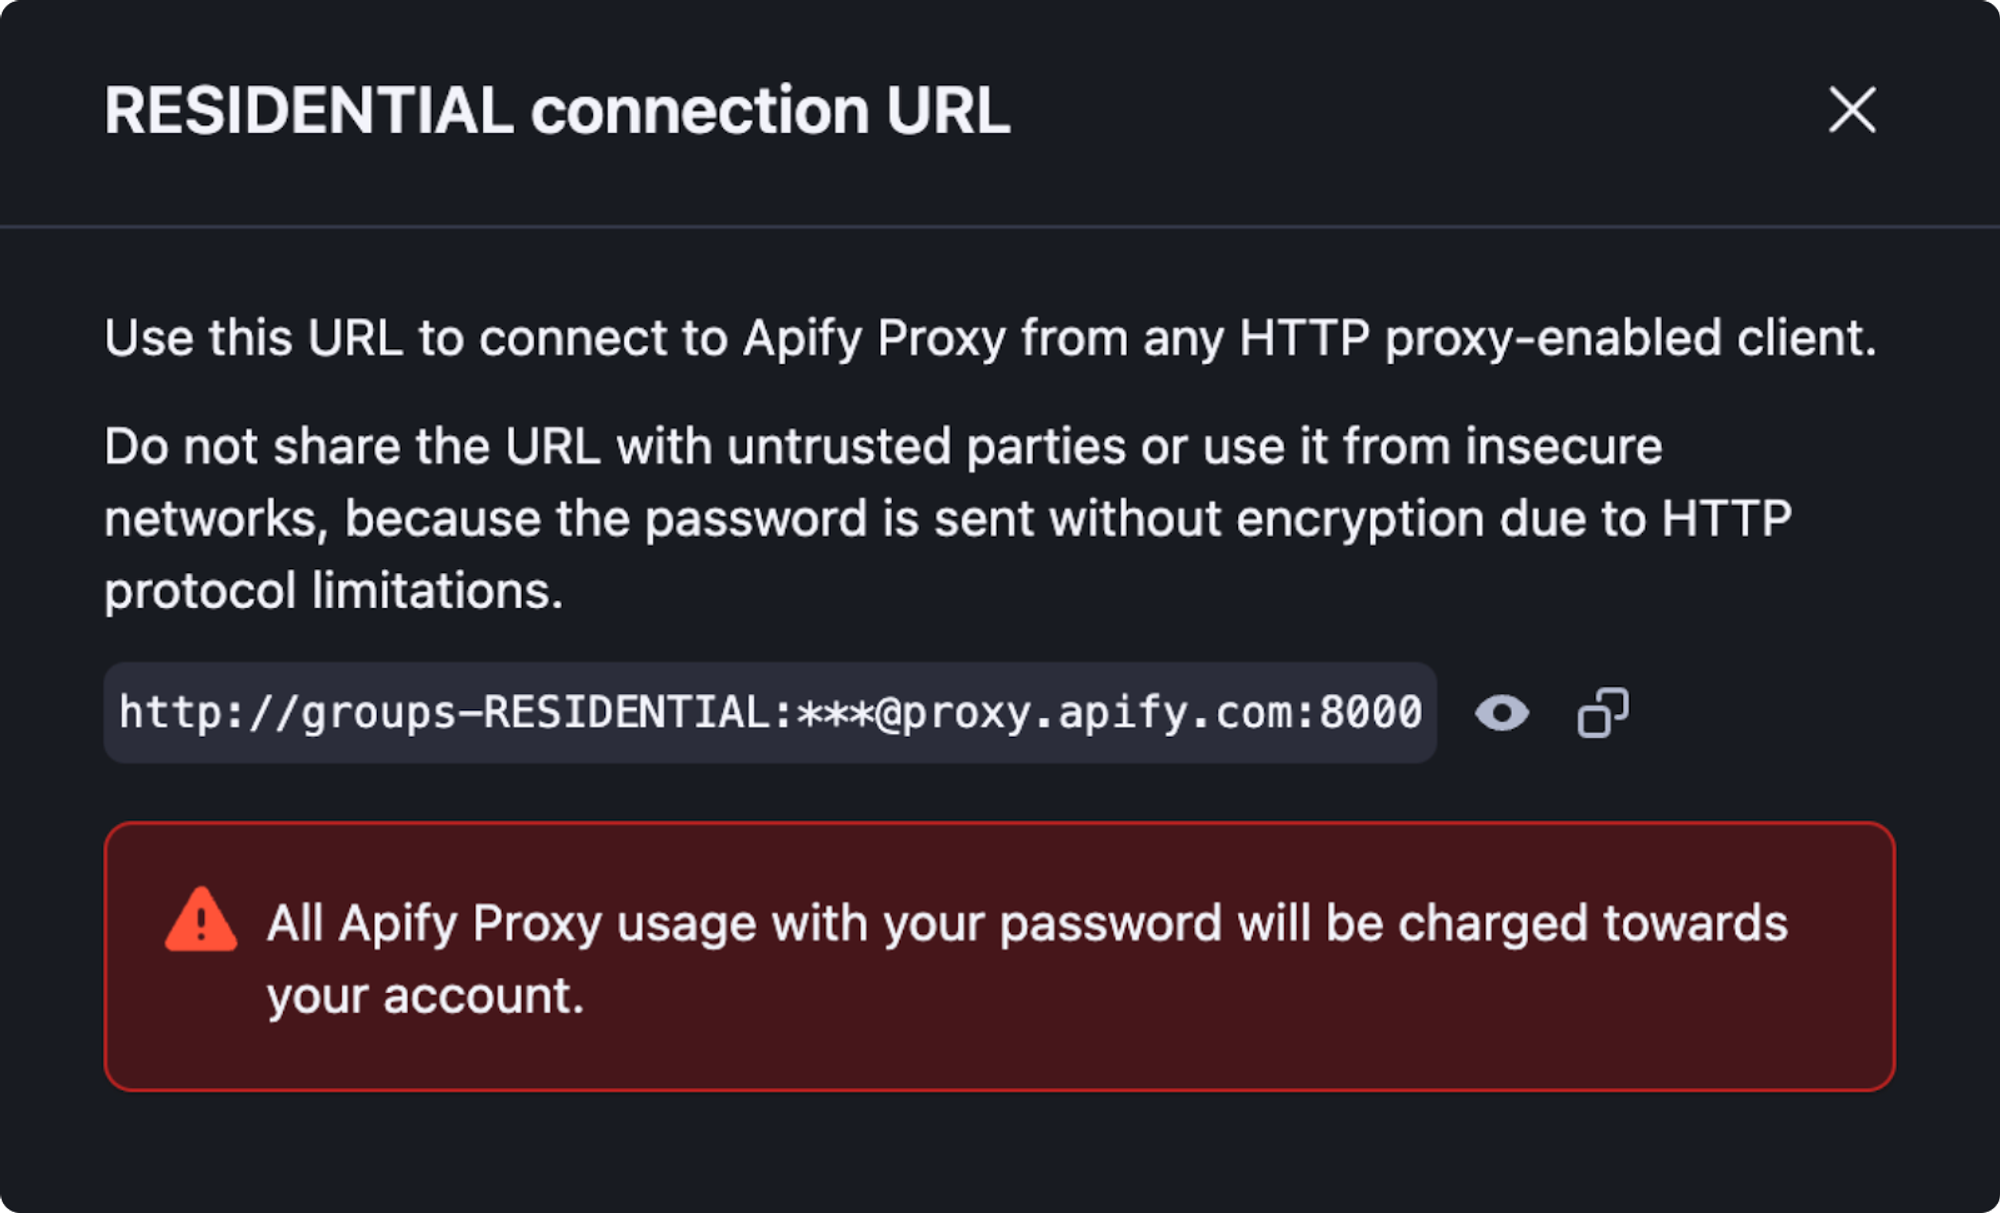 Setting up residential proxy with Apify